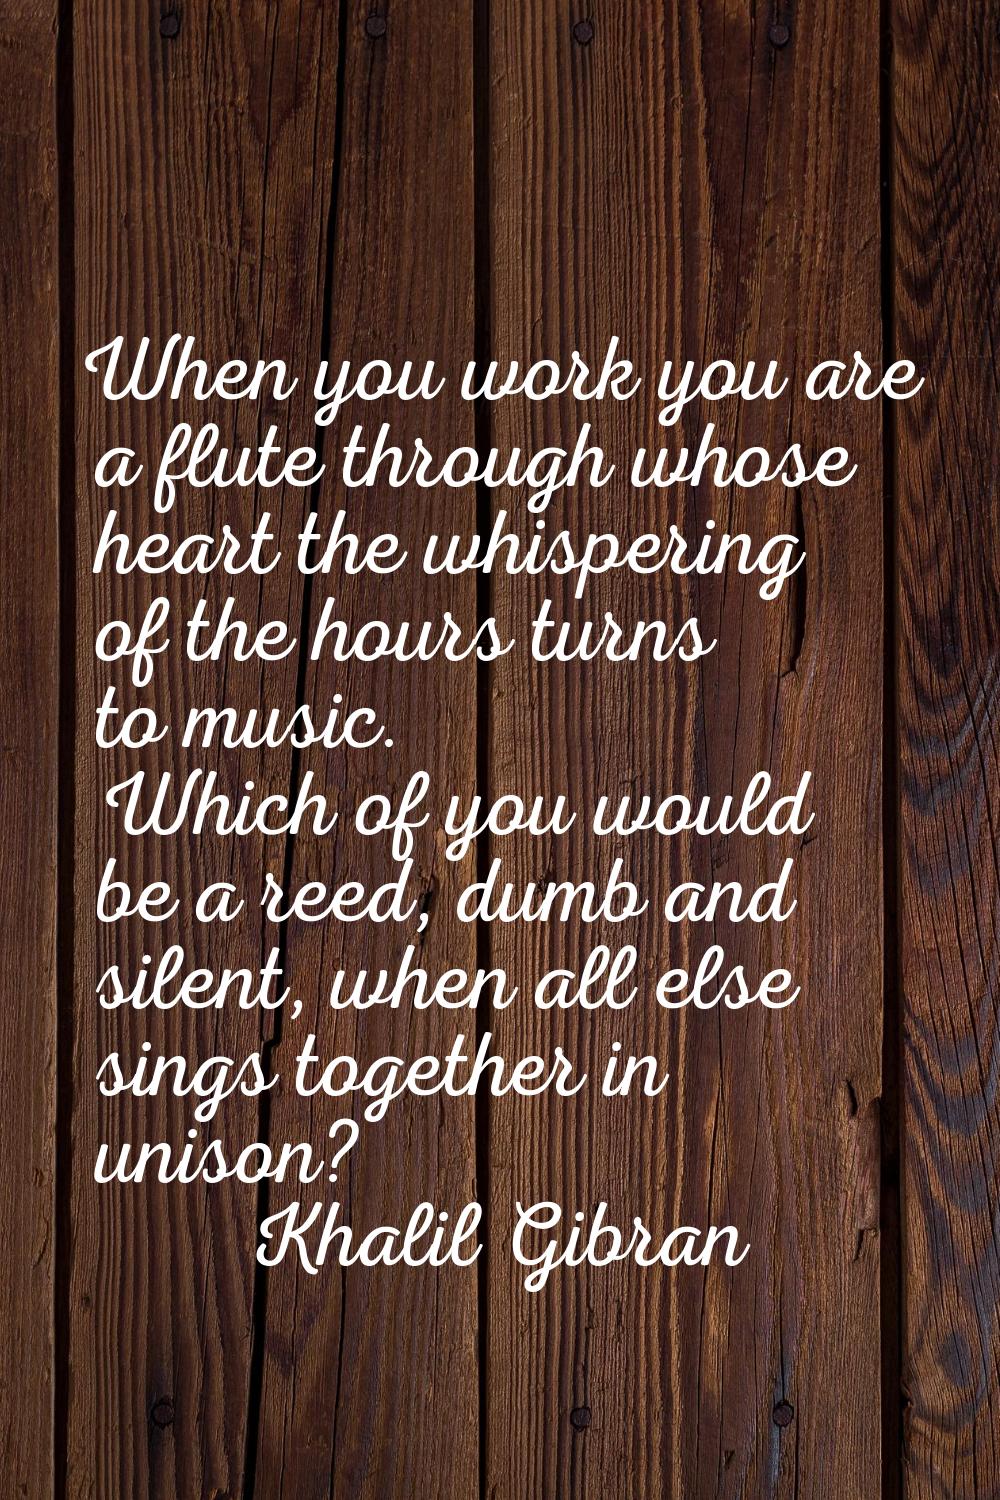 When you work you are a flute through whose heart the whispering of the hours turns to music. Which